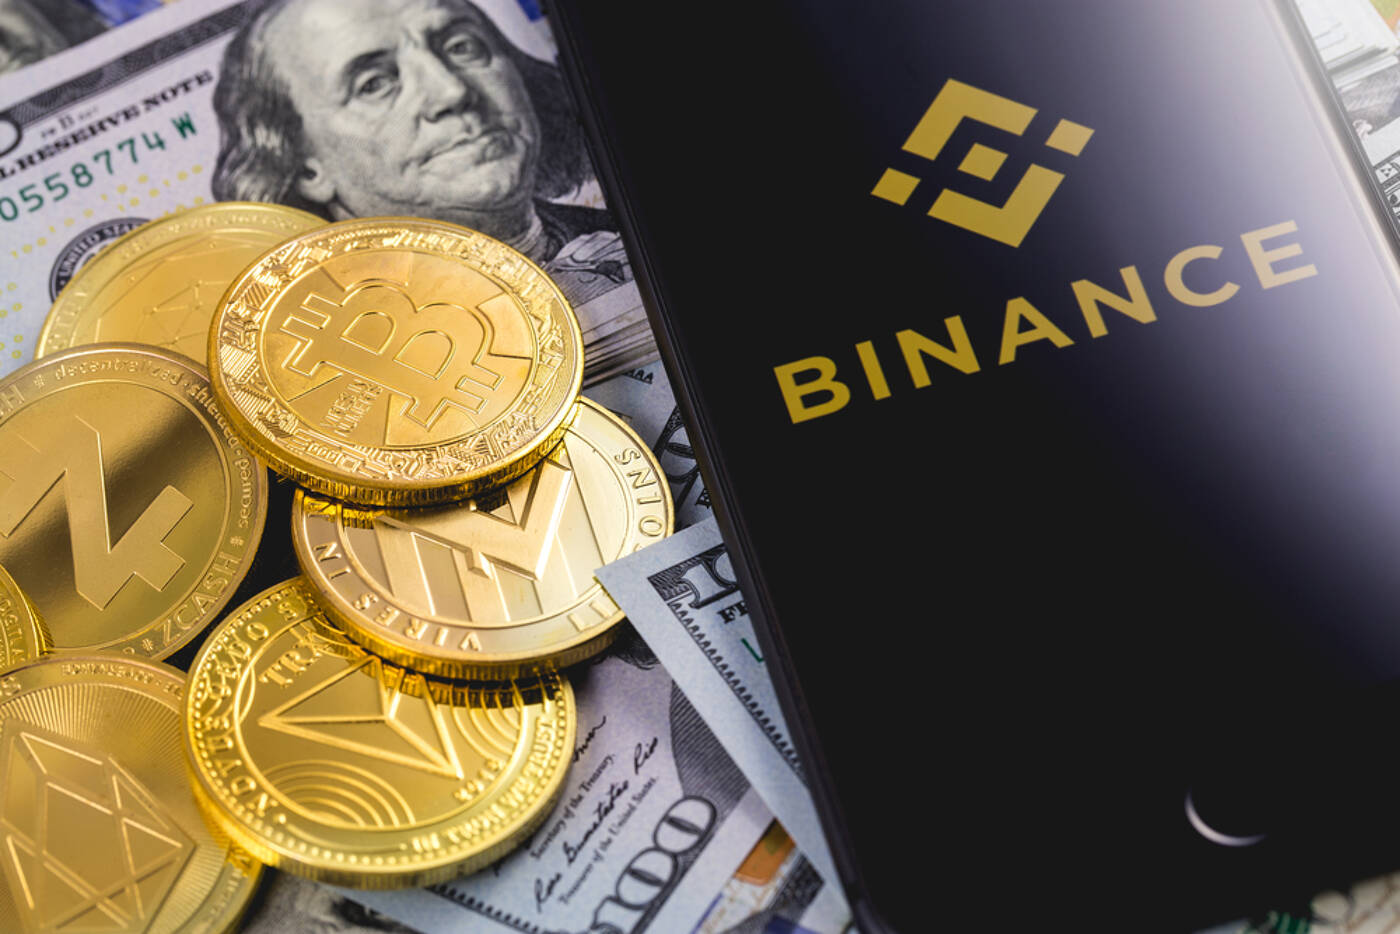 Binance Corporates with Regulators to Continue Operating in Ontario